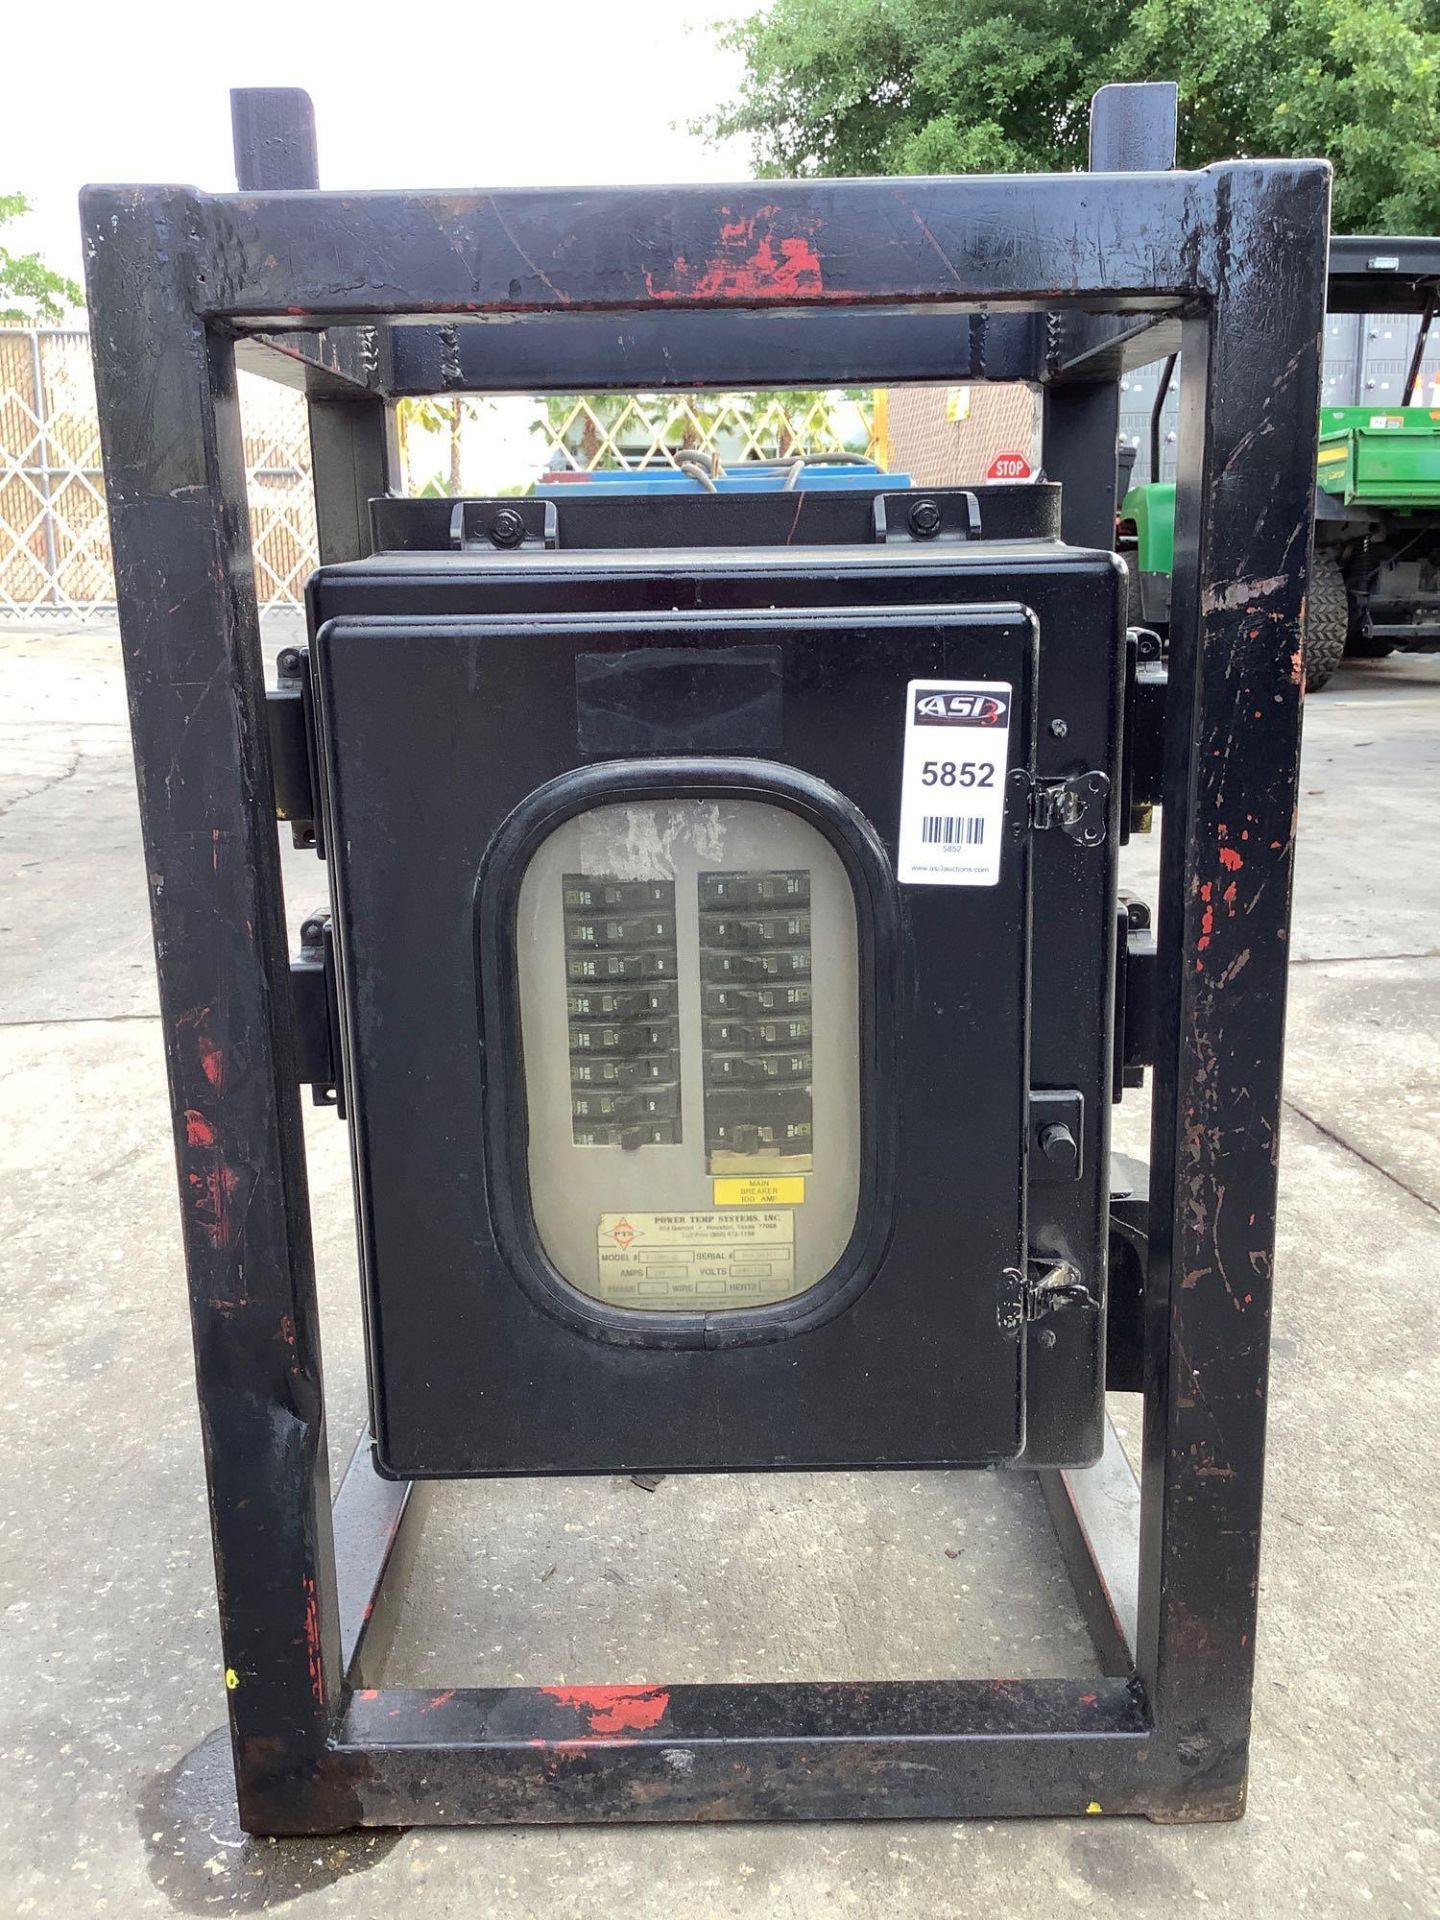 POWER TEMP SYSTEM MODEL P-1001-Q , PHASE 3, APPROX 208Y/120 VOLTS